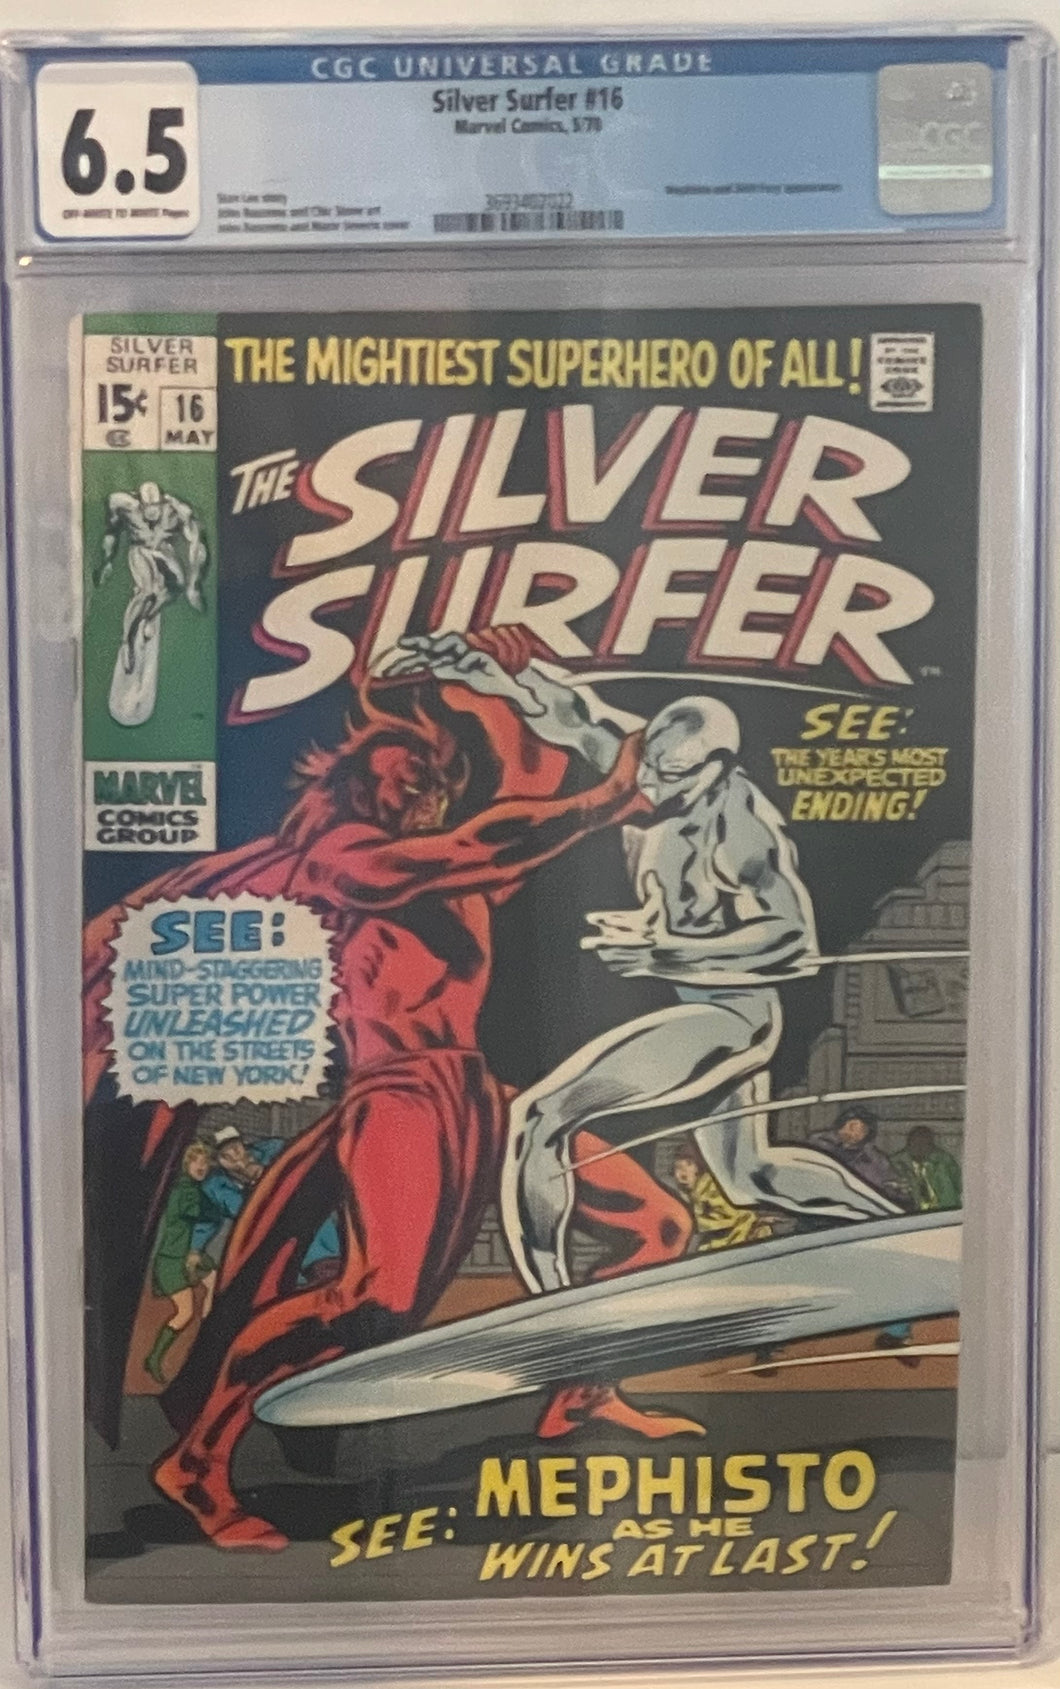 The Silver Surfer #16 6.5 CGC